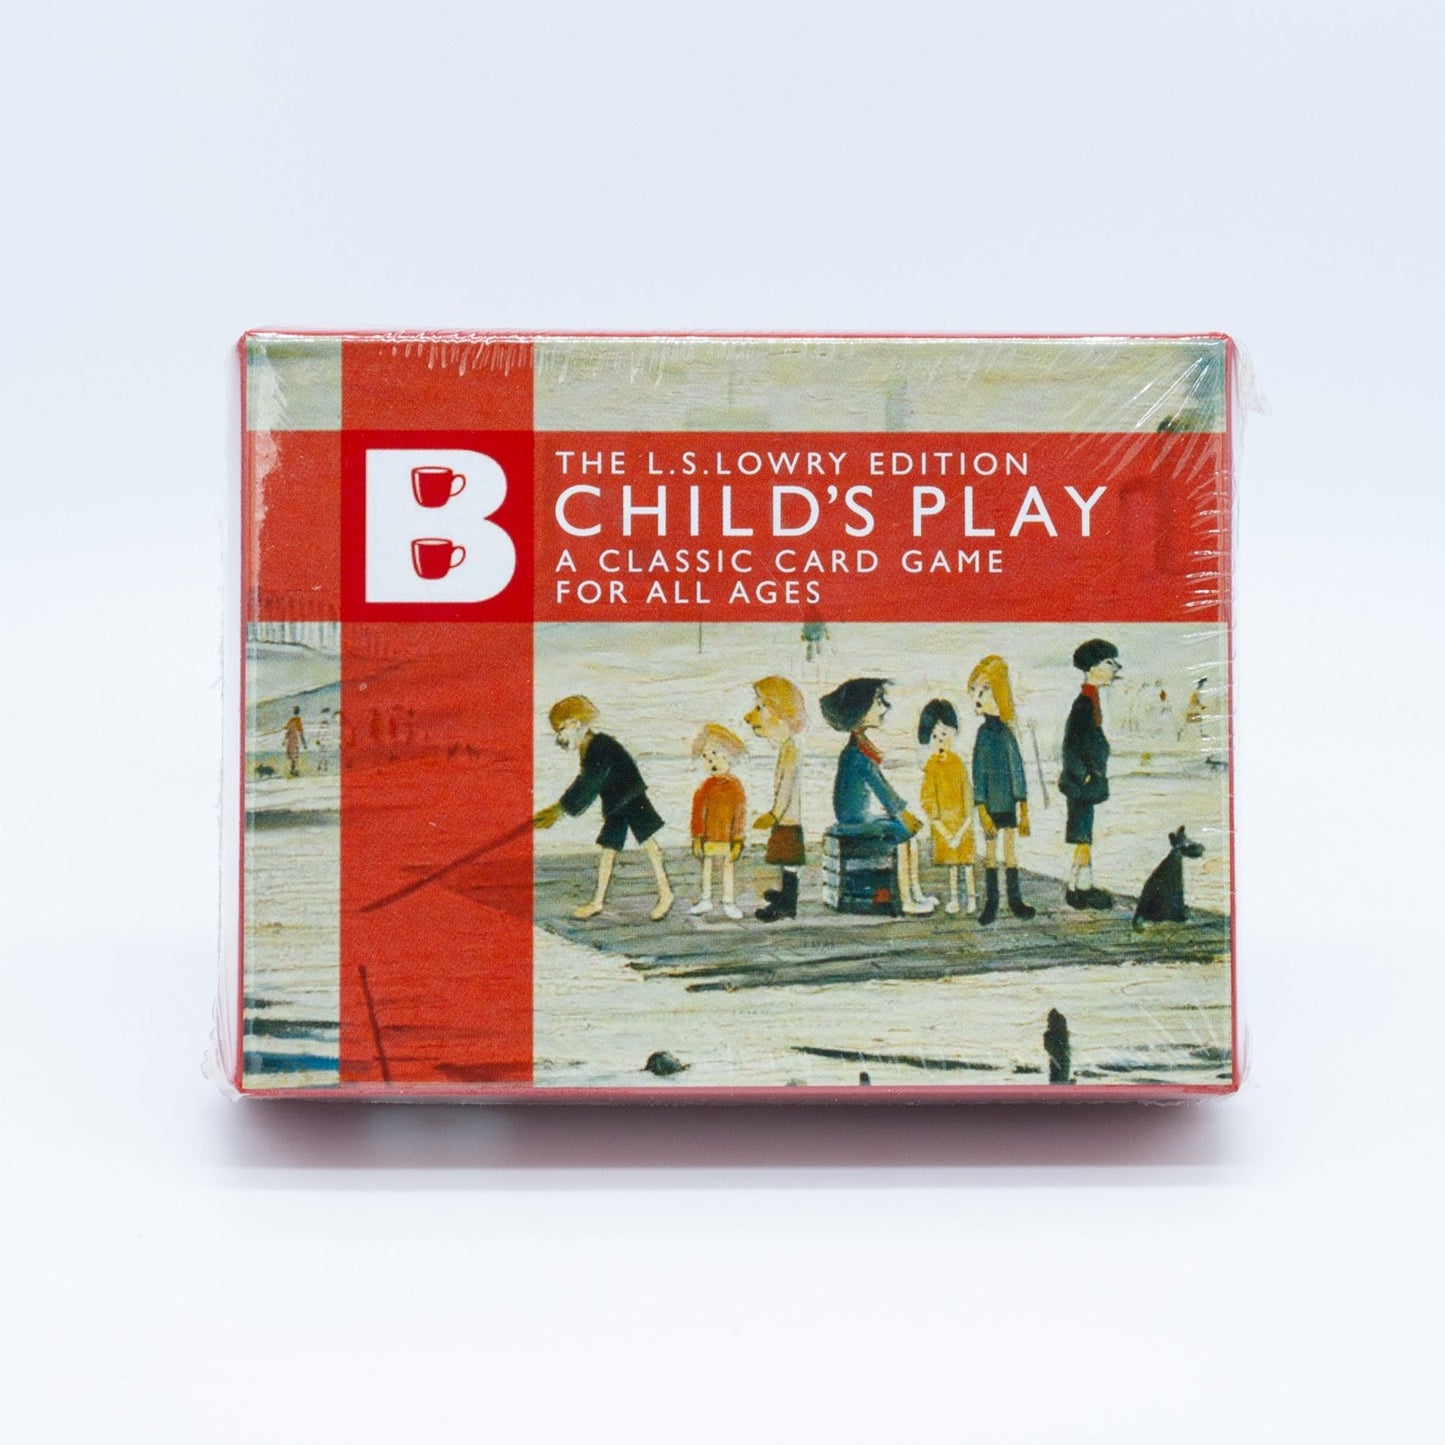 The L.S Lowry Edition Child's Play Card Game